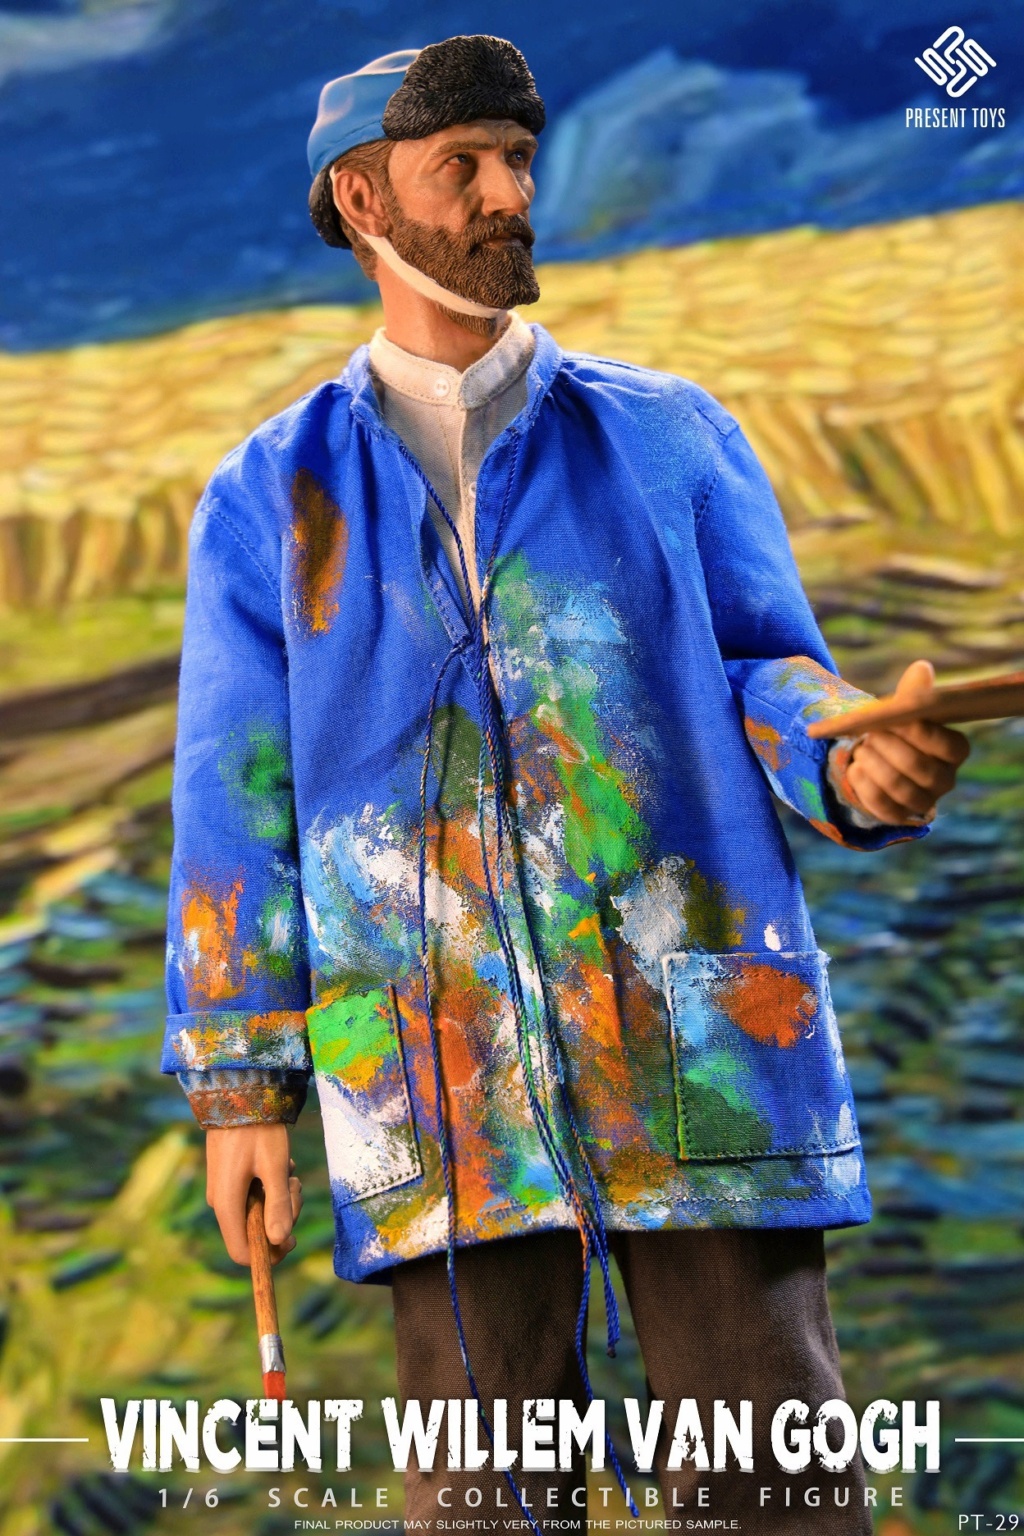 Historical - NEW PRODUCT: Present Toys: 1/6 "Van Gogh" Action Figure #PT-sp29 19542410